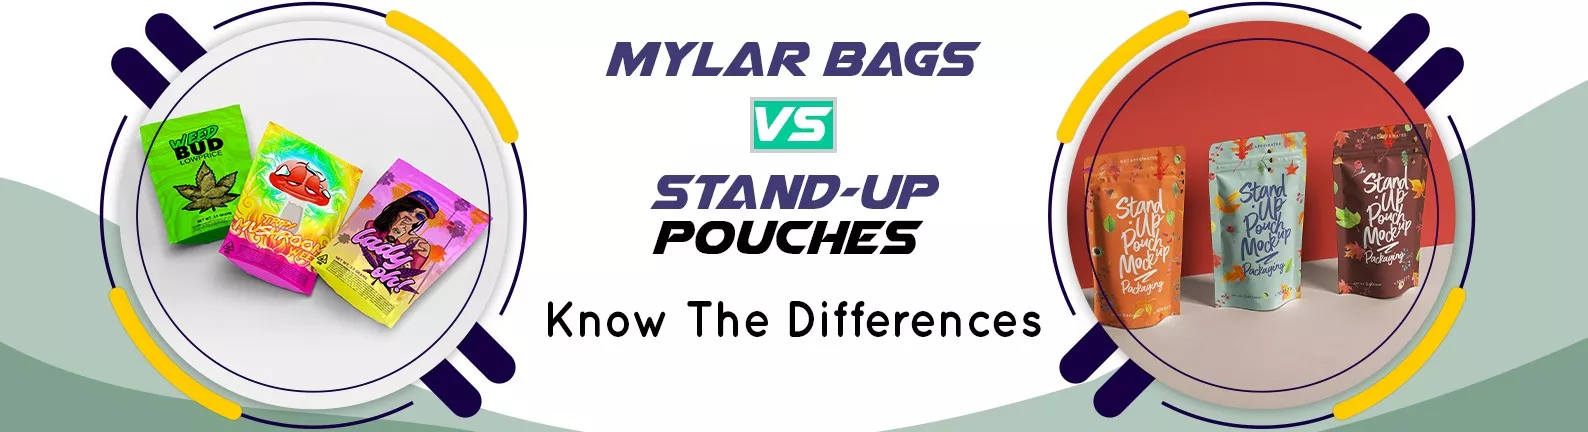 Mylar-Bags-Vs_-Stand-Up-Pouches-Know-The-Differences